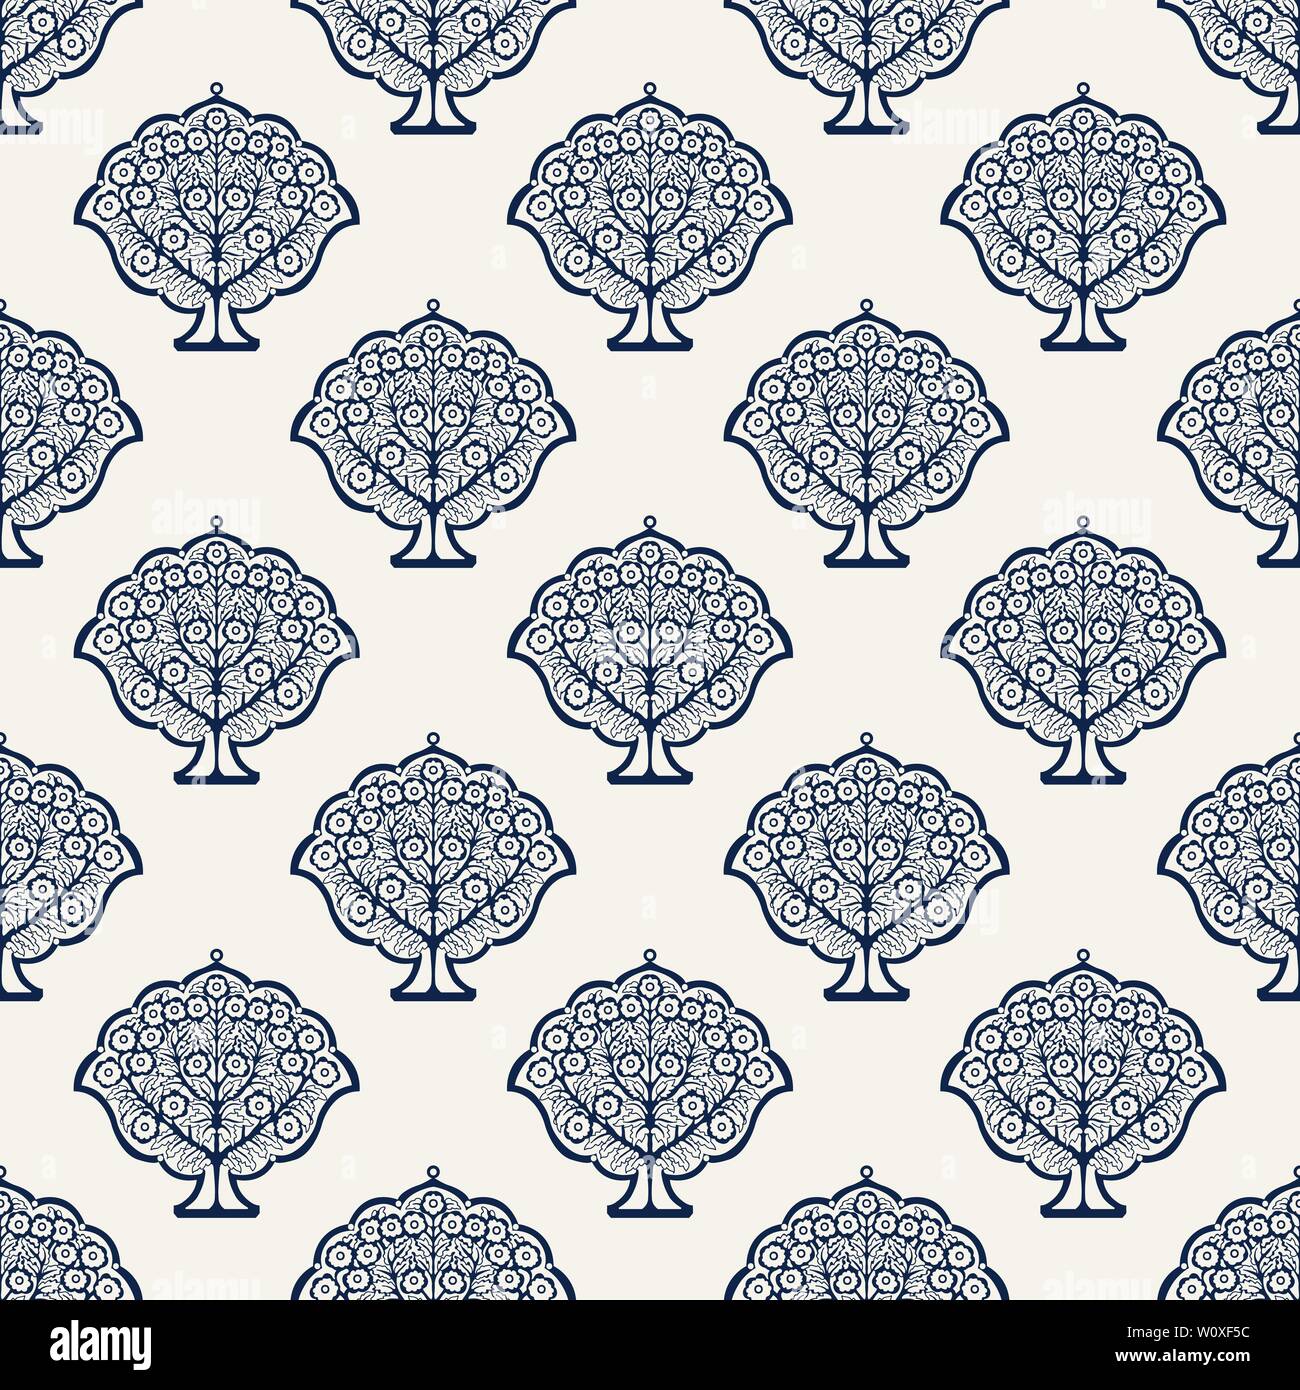 Indigo dye woodblock printed seamless ethnic floral all over pattern. Traditional oriental ornament of India, blossoming trees, navy blue on ecru Stock Vector